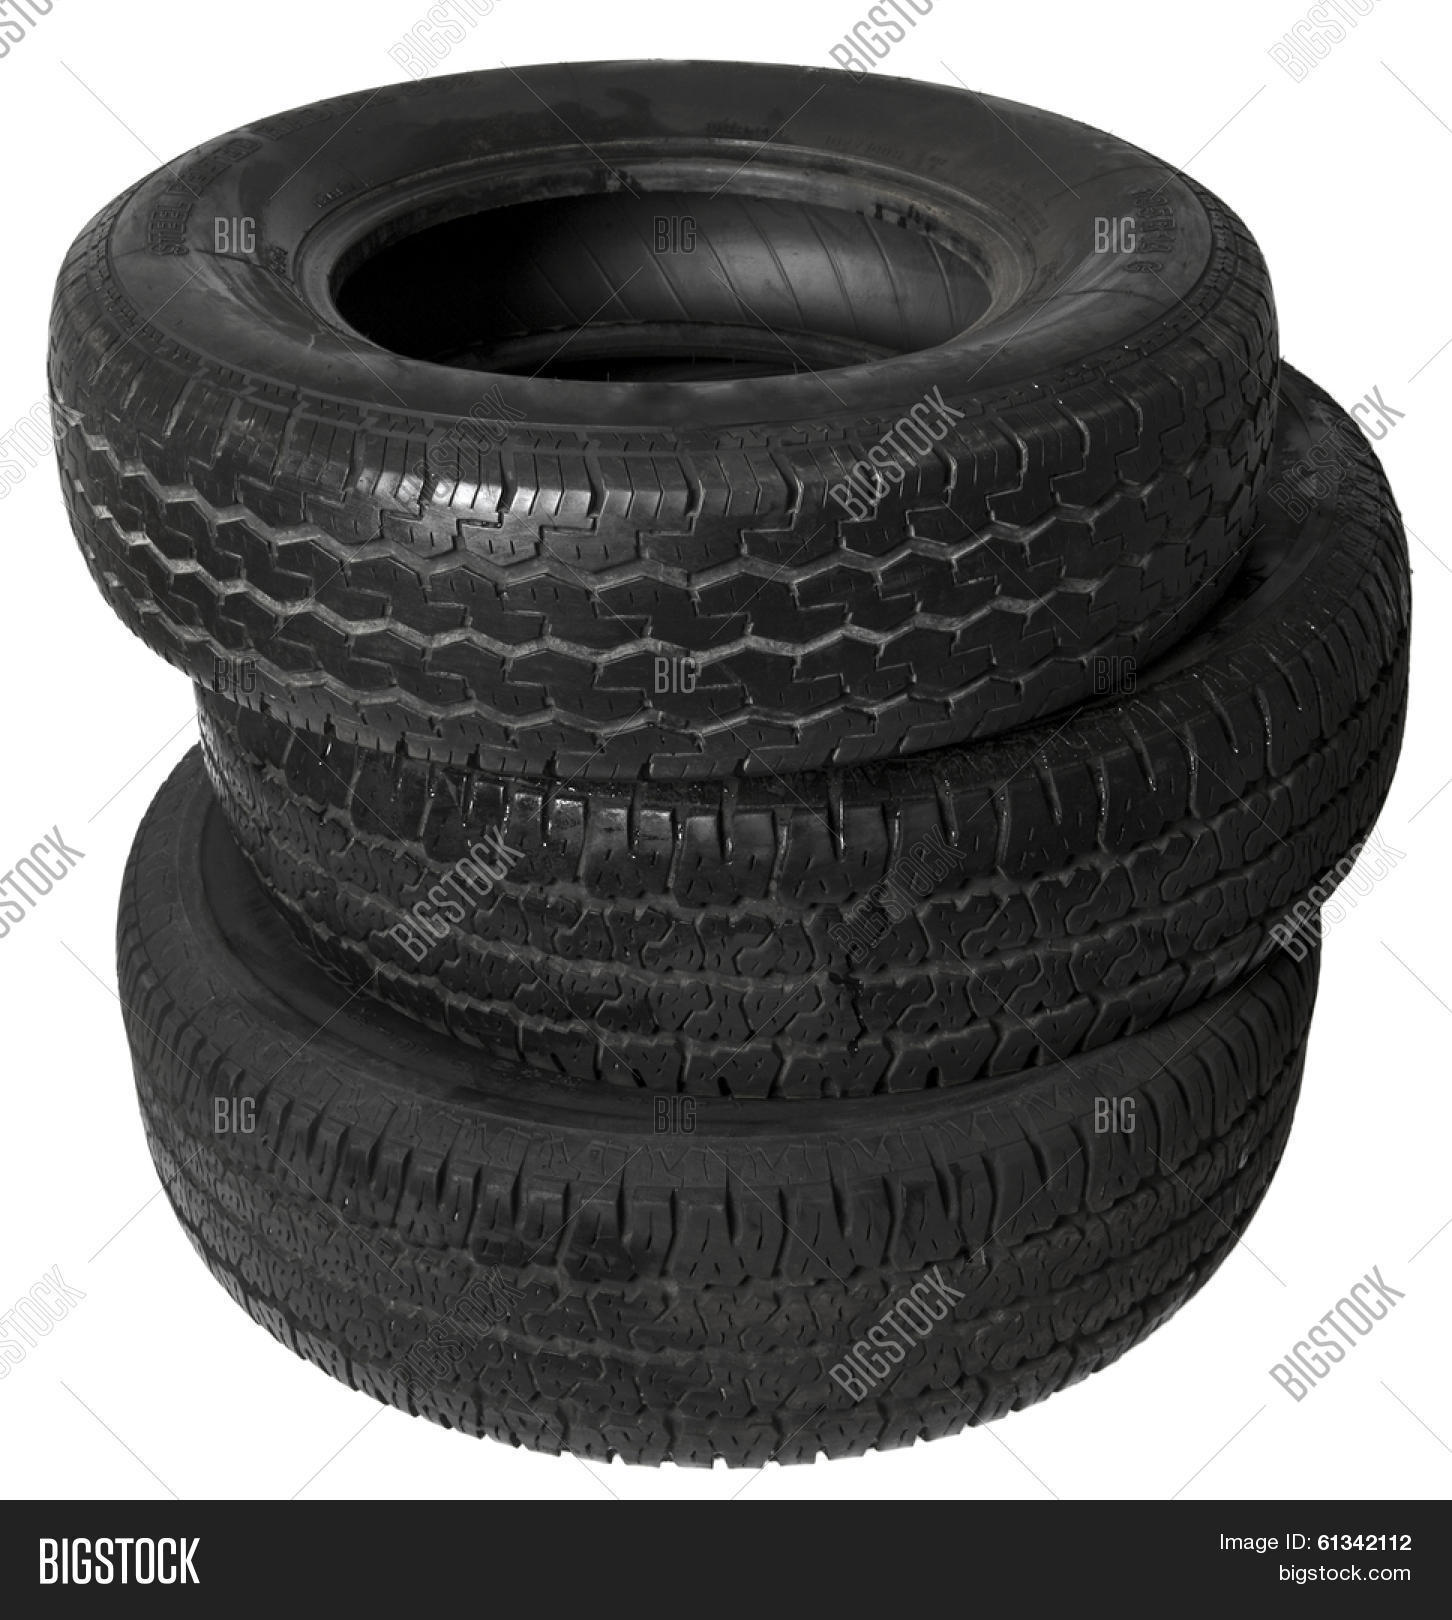 Free Photo Stack Of Tires Black Gum Many Free Download Jooinn